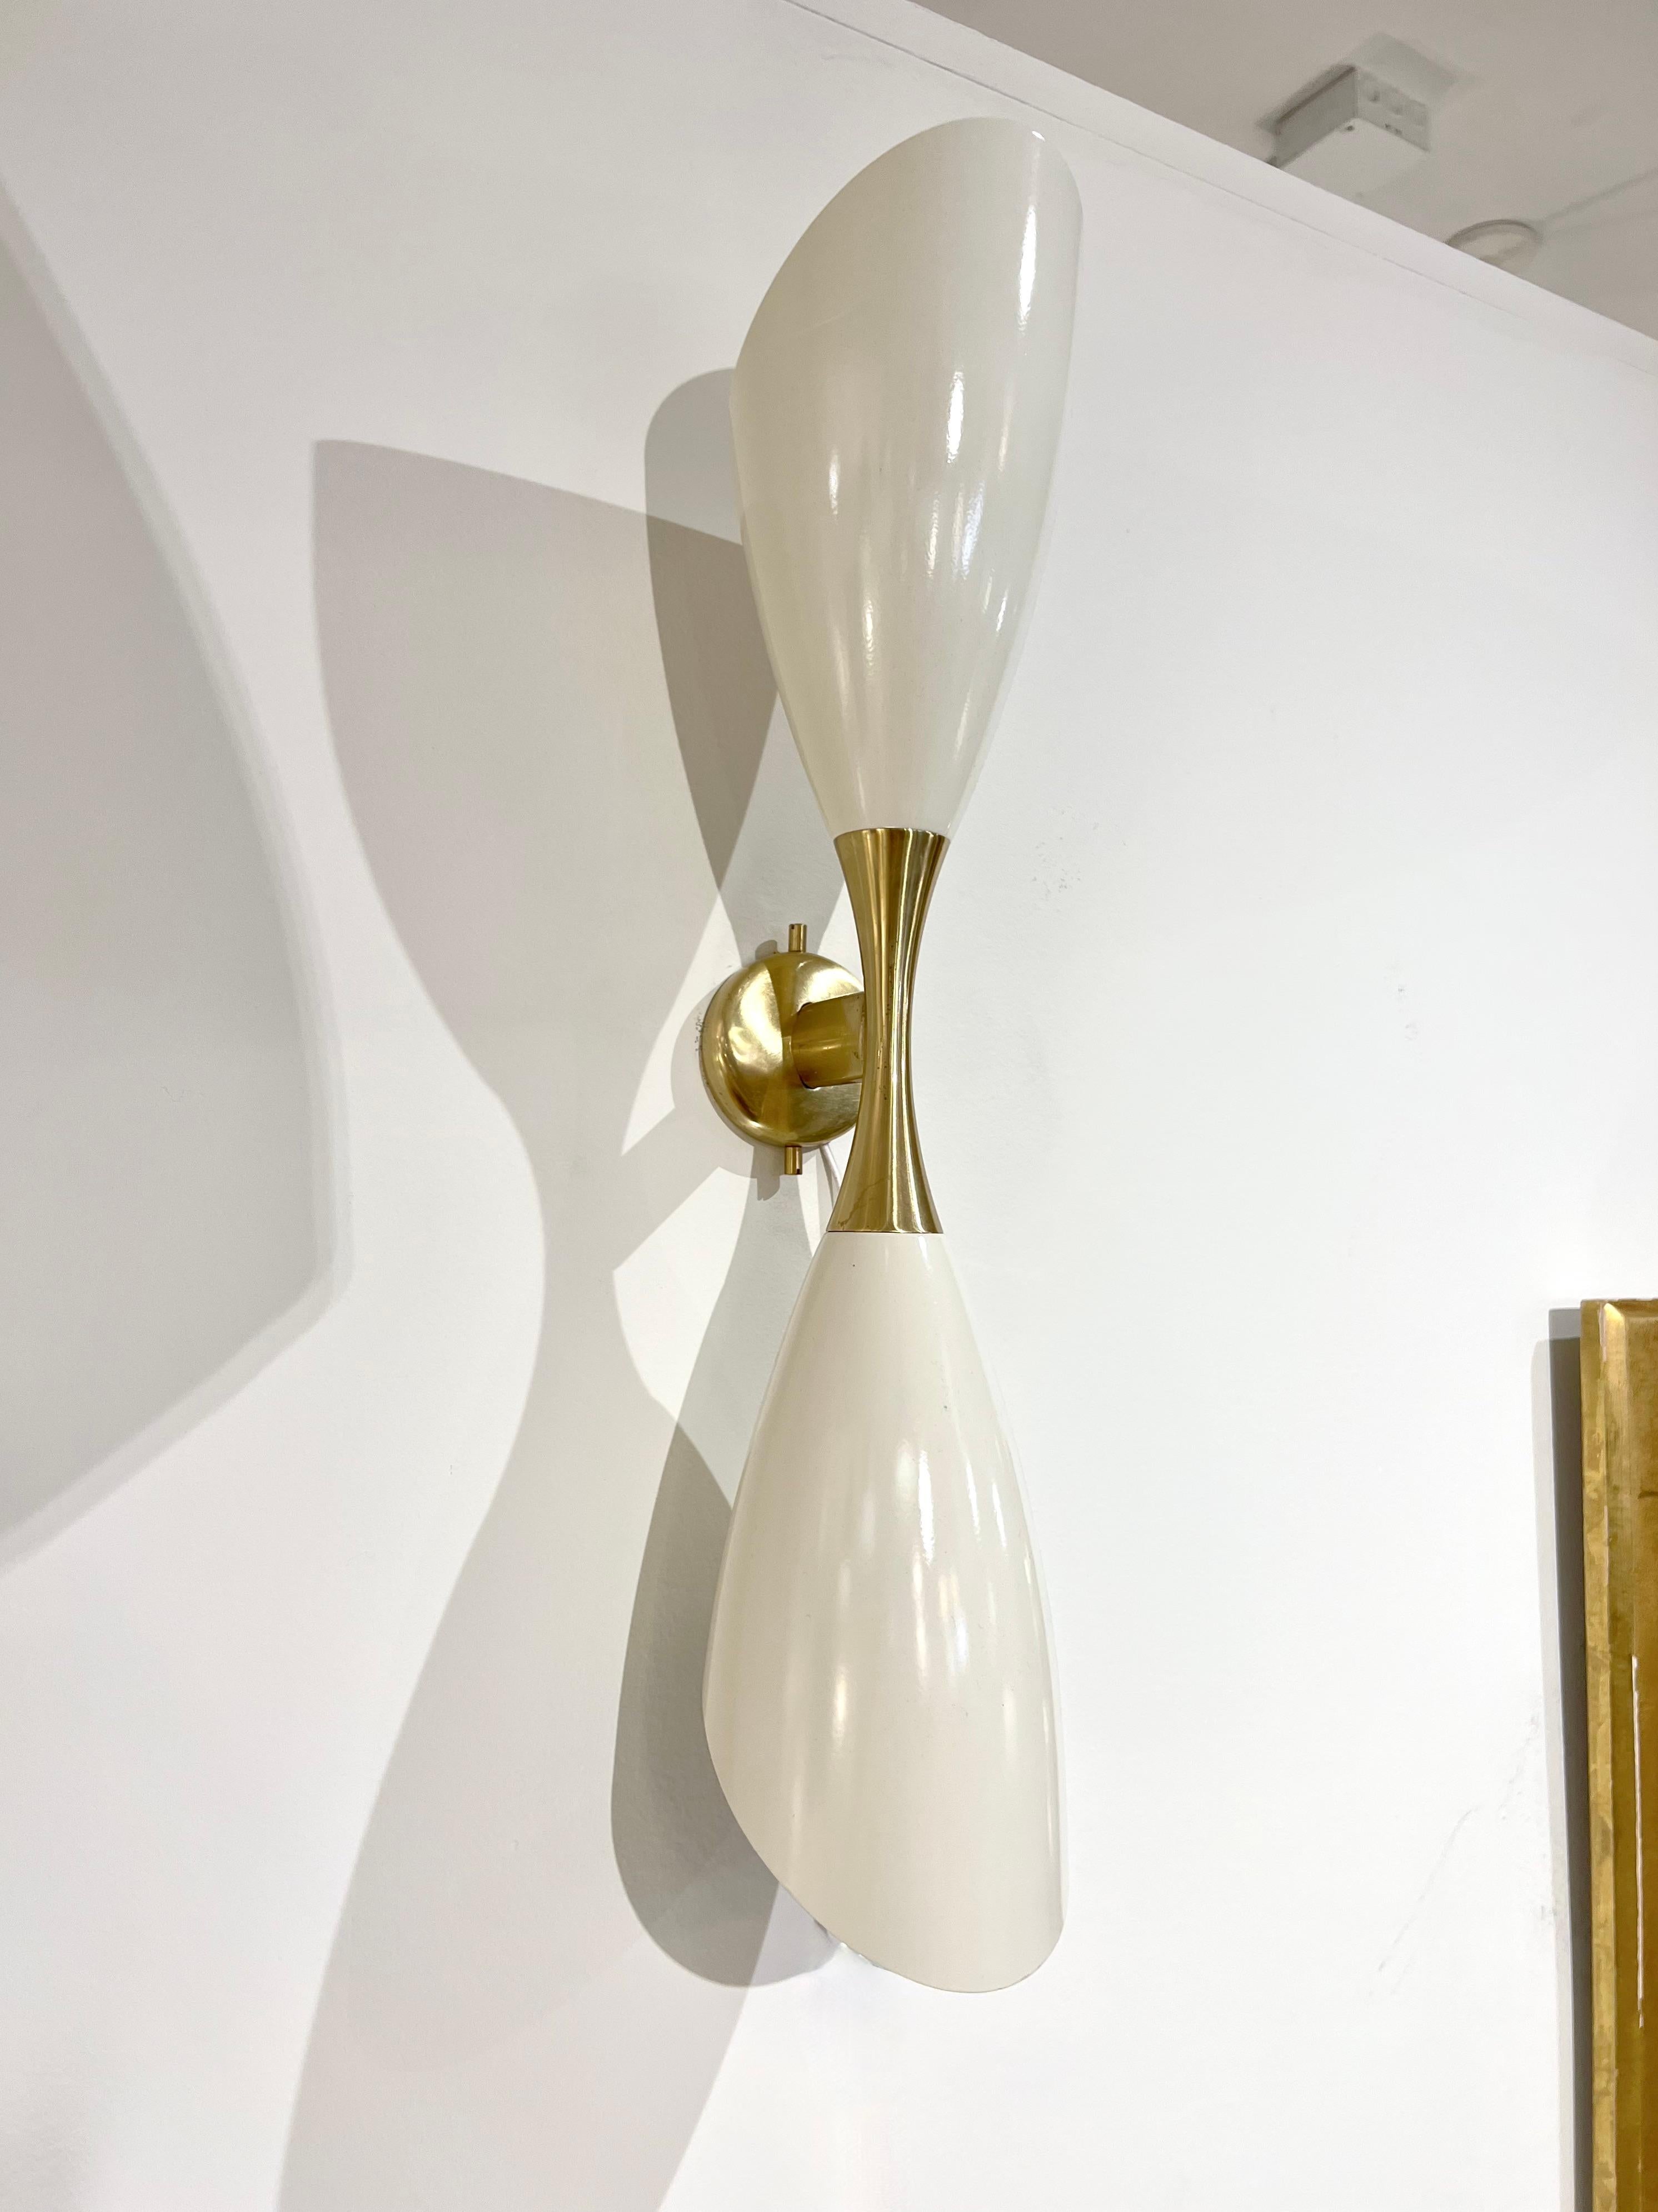 An impressive contemporary sconce in the style of the classic designs of the Mid Century period. Made in Italy, contemporary.
Made in brass and off-white enamel covered metal shades with two sockets.